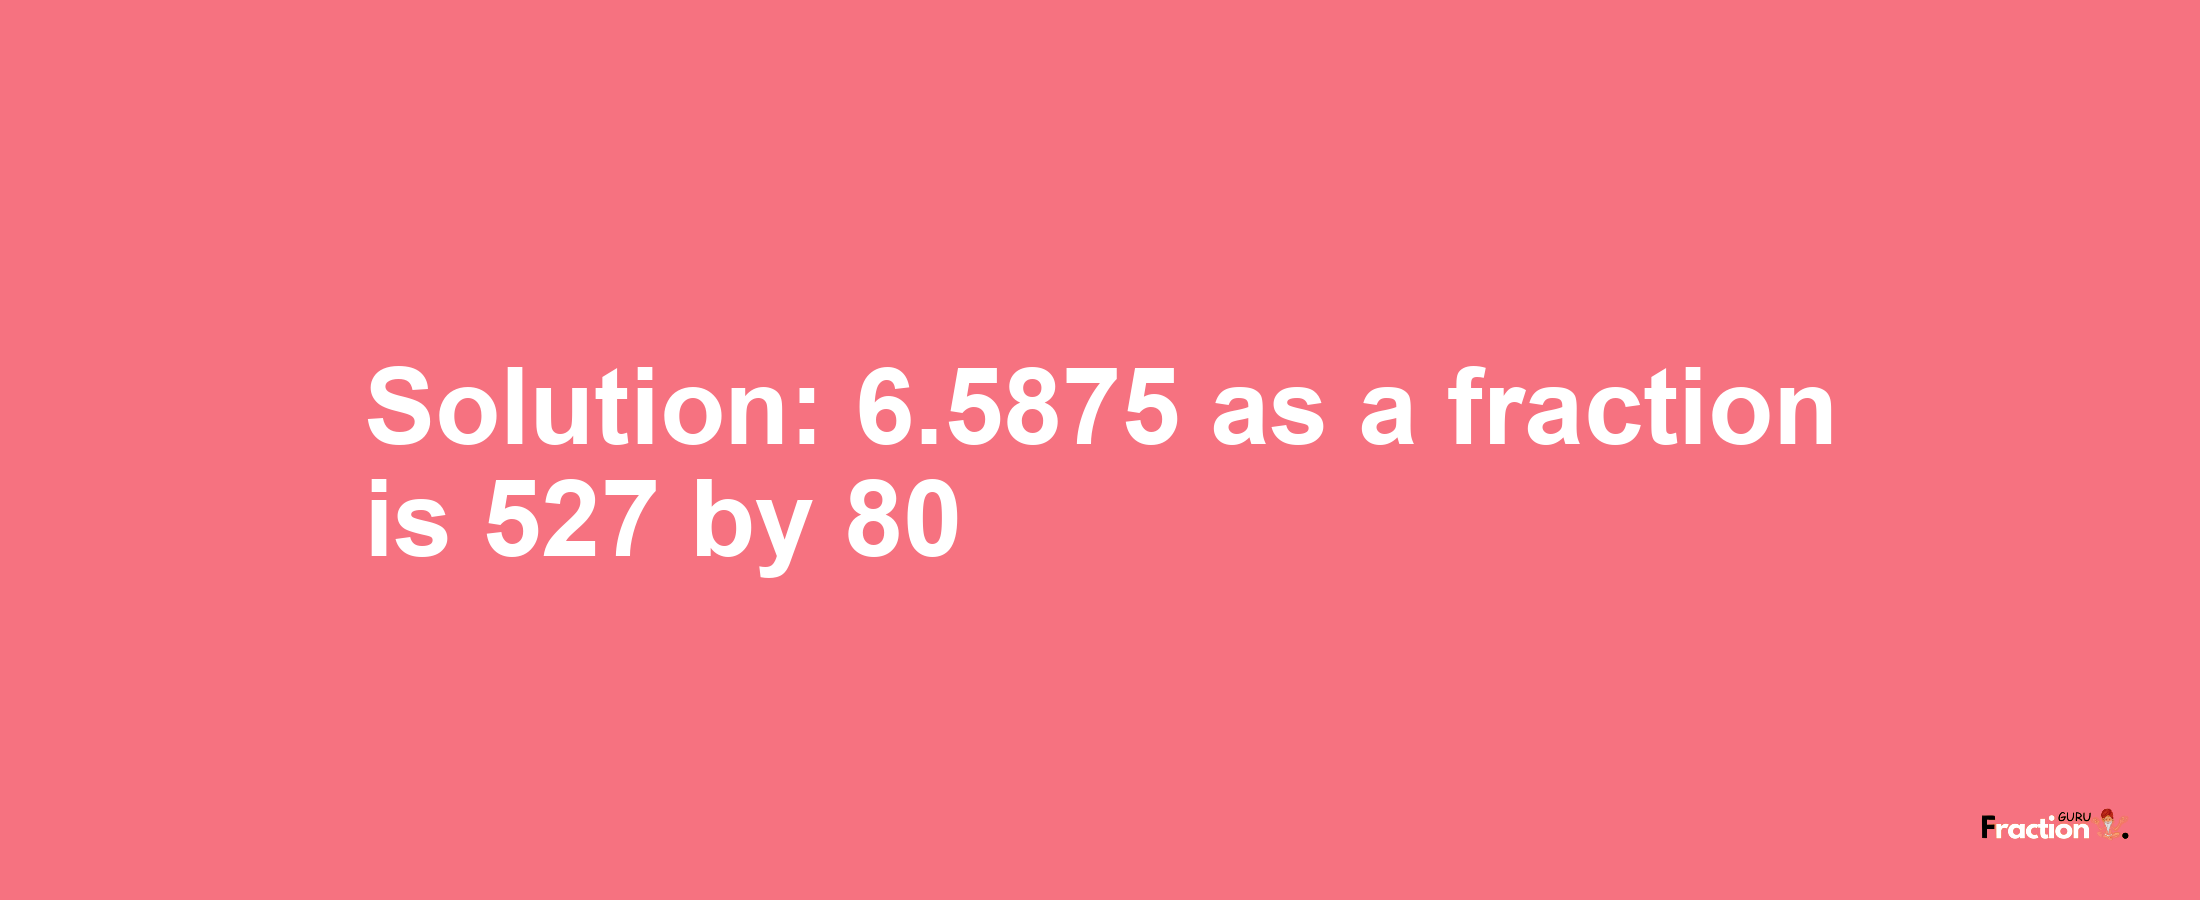 Solution:6.5875 as a fraction is 527/80